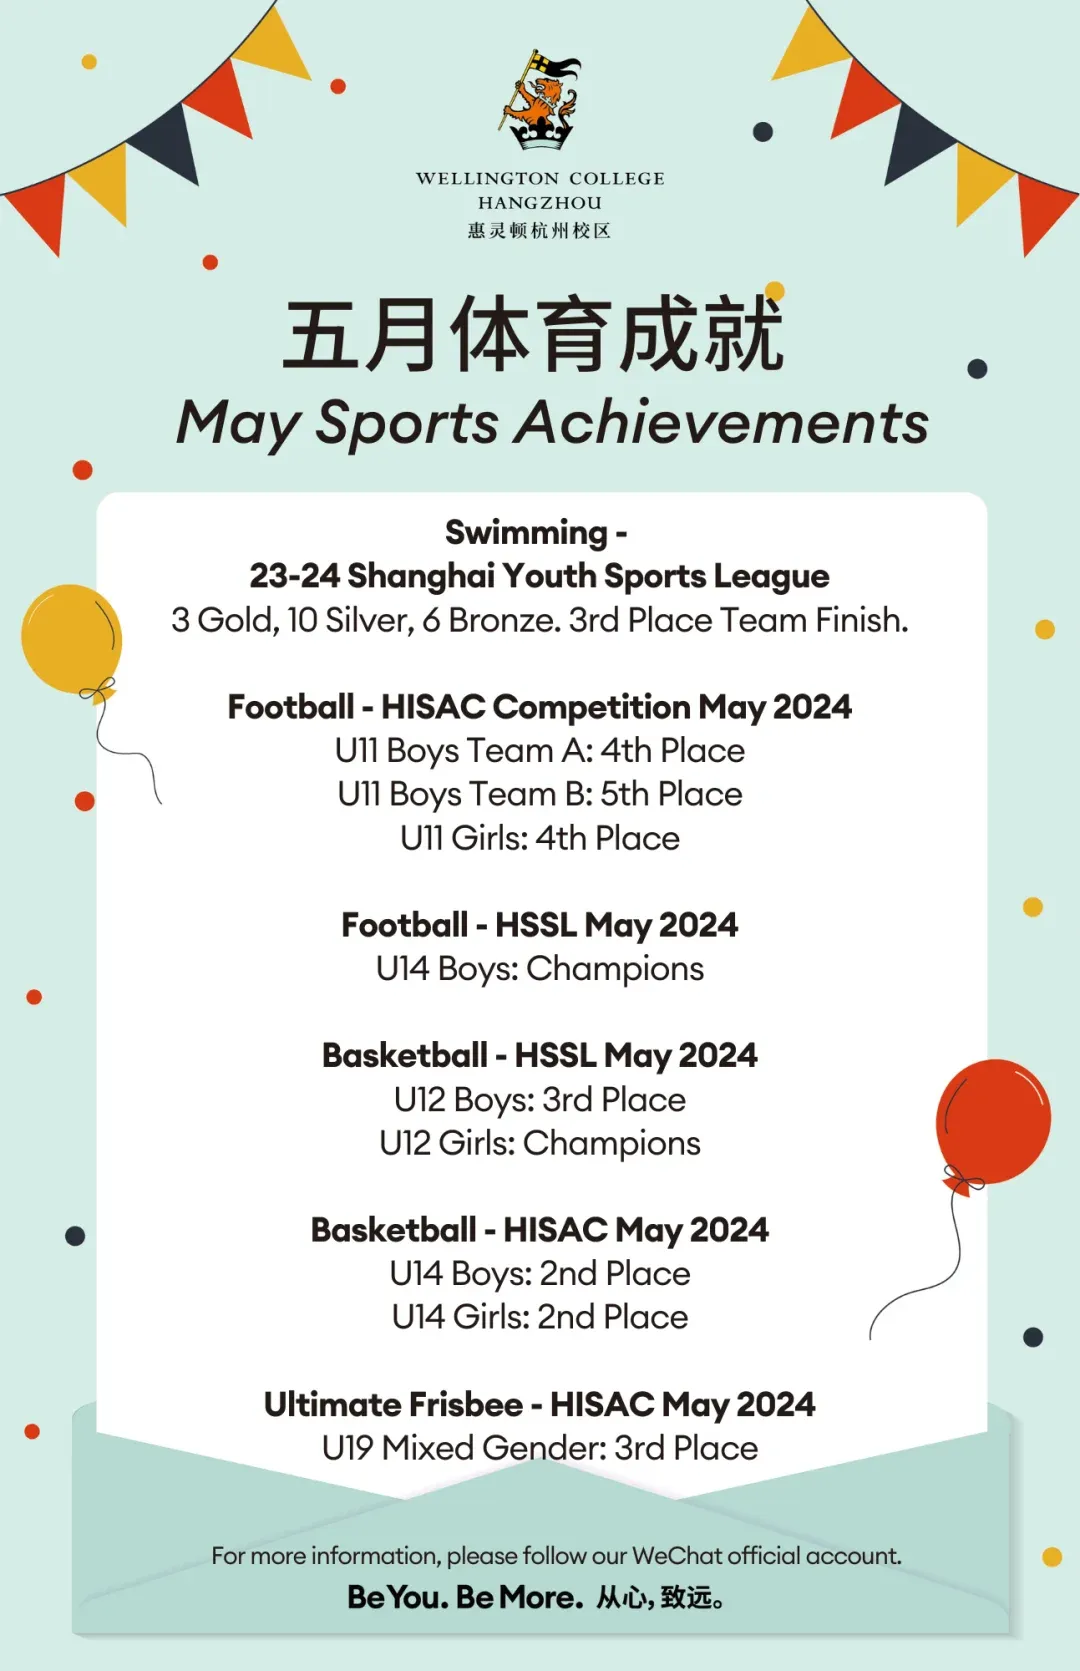 Celebrating our May Sports Achievements!